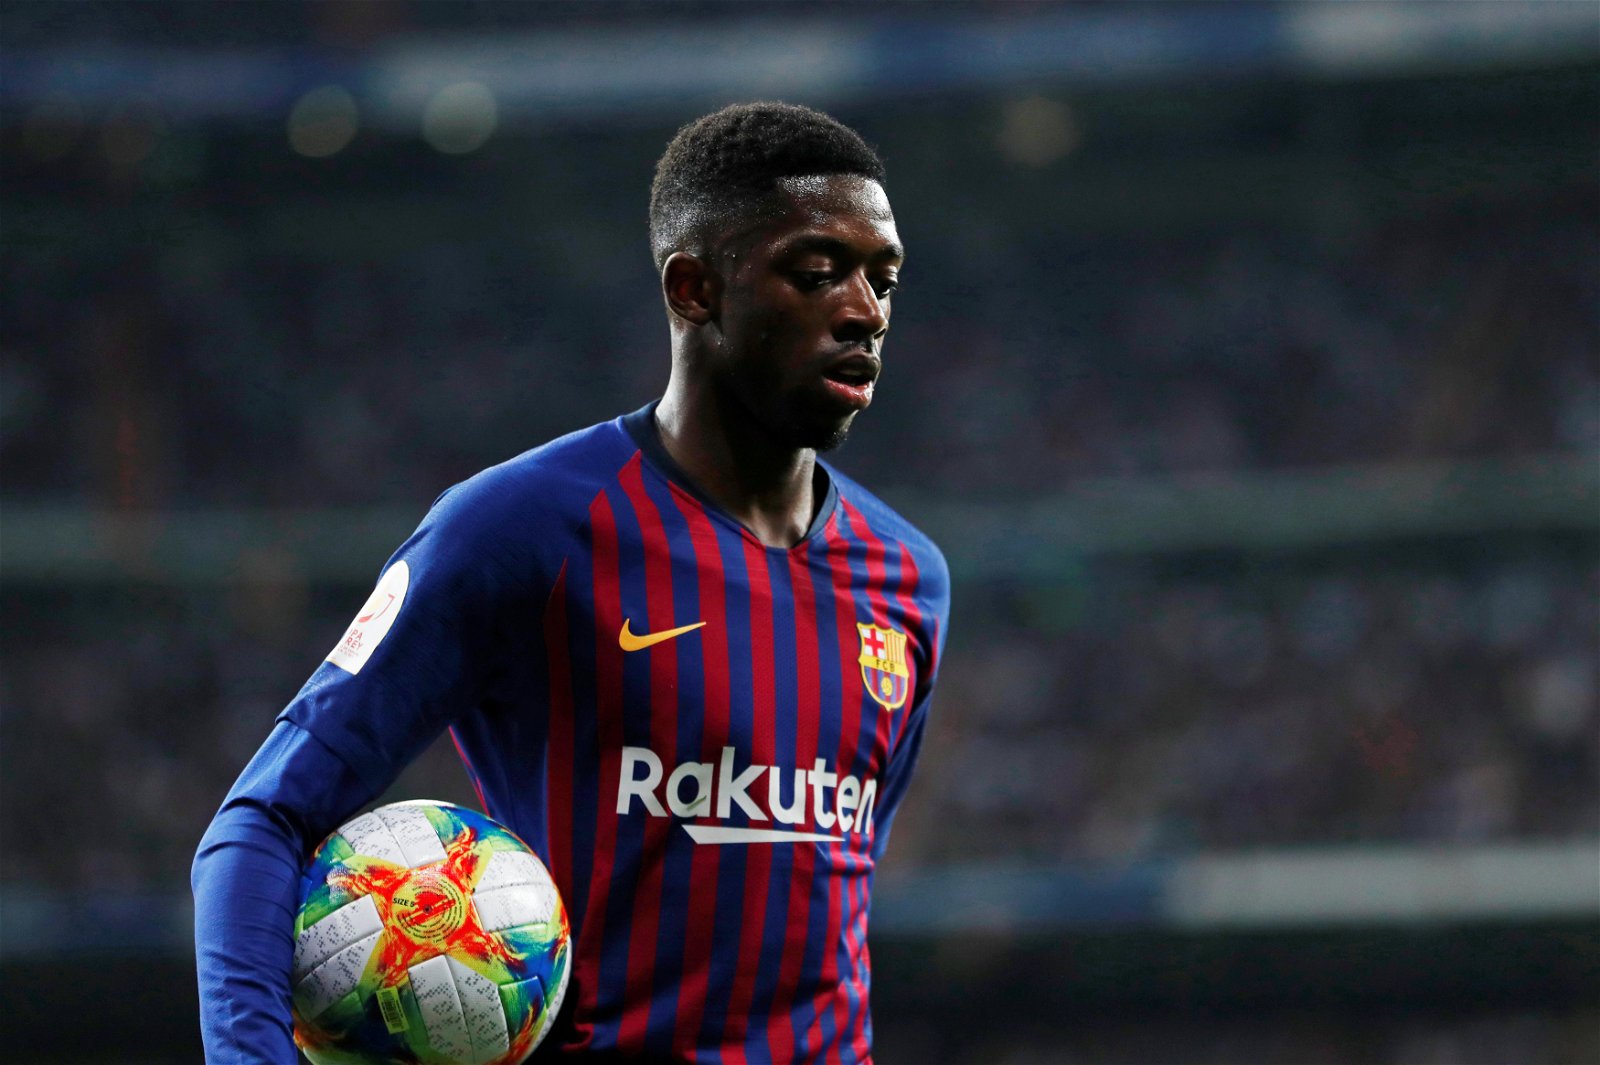 Barcelona's troublesome forward Ousmane Dembele out another injury 1